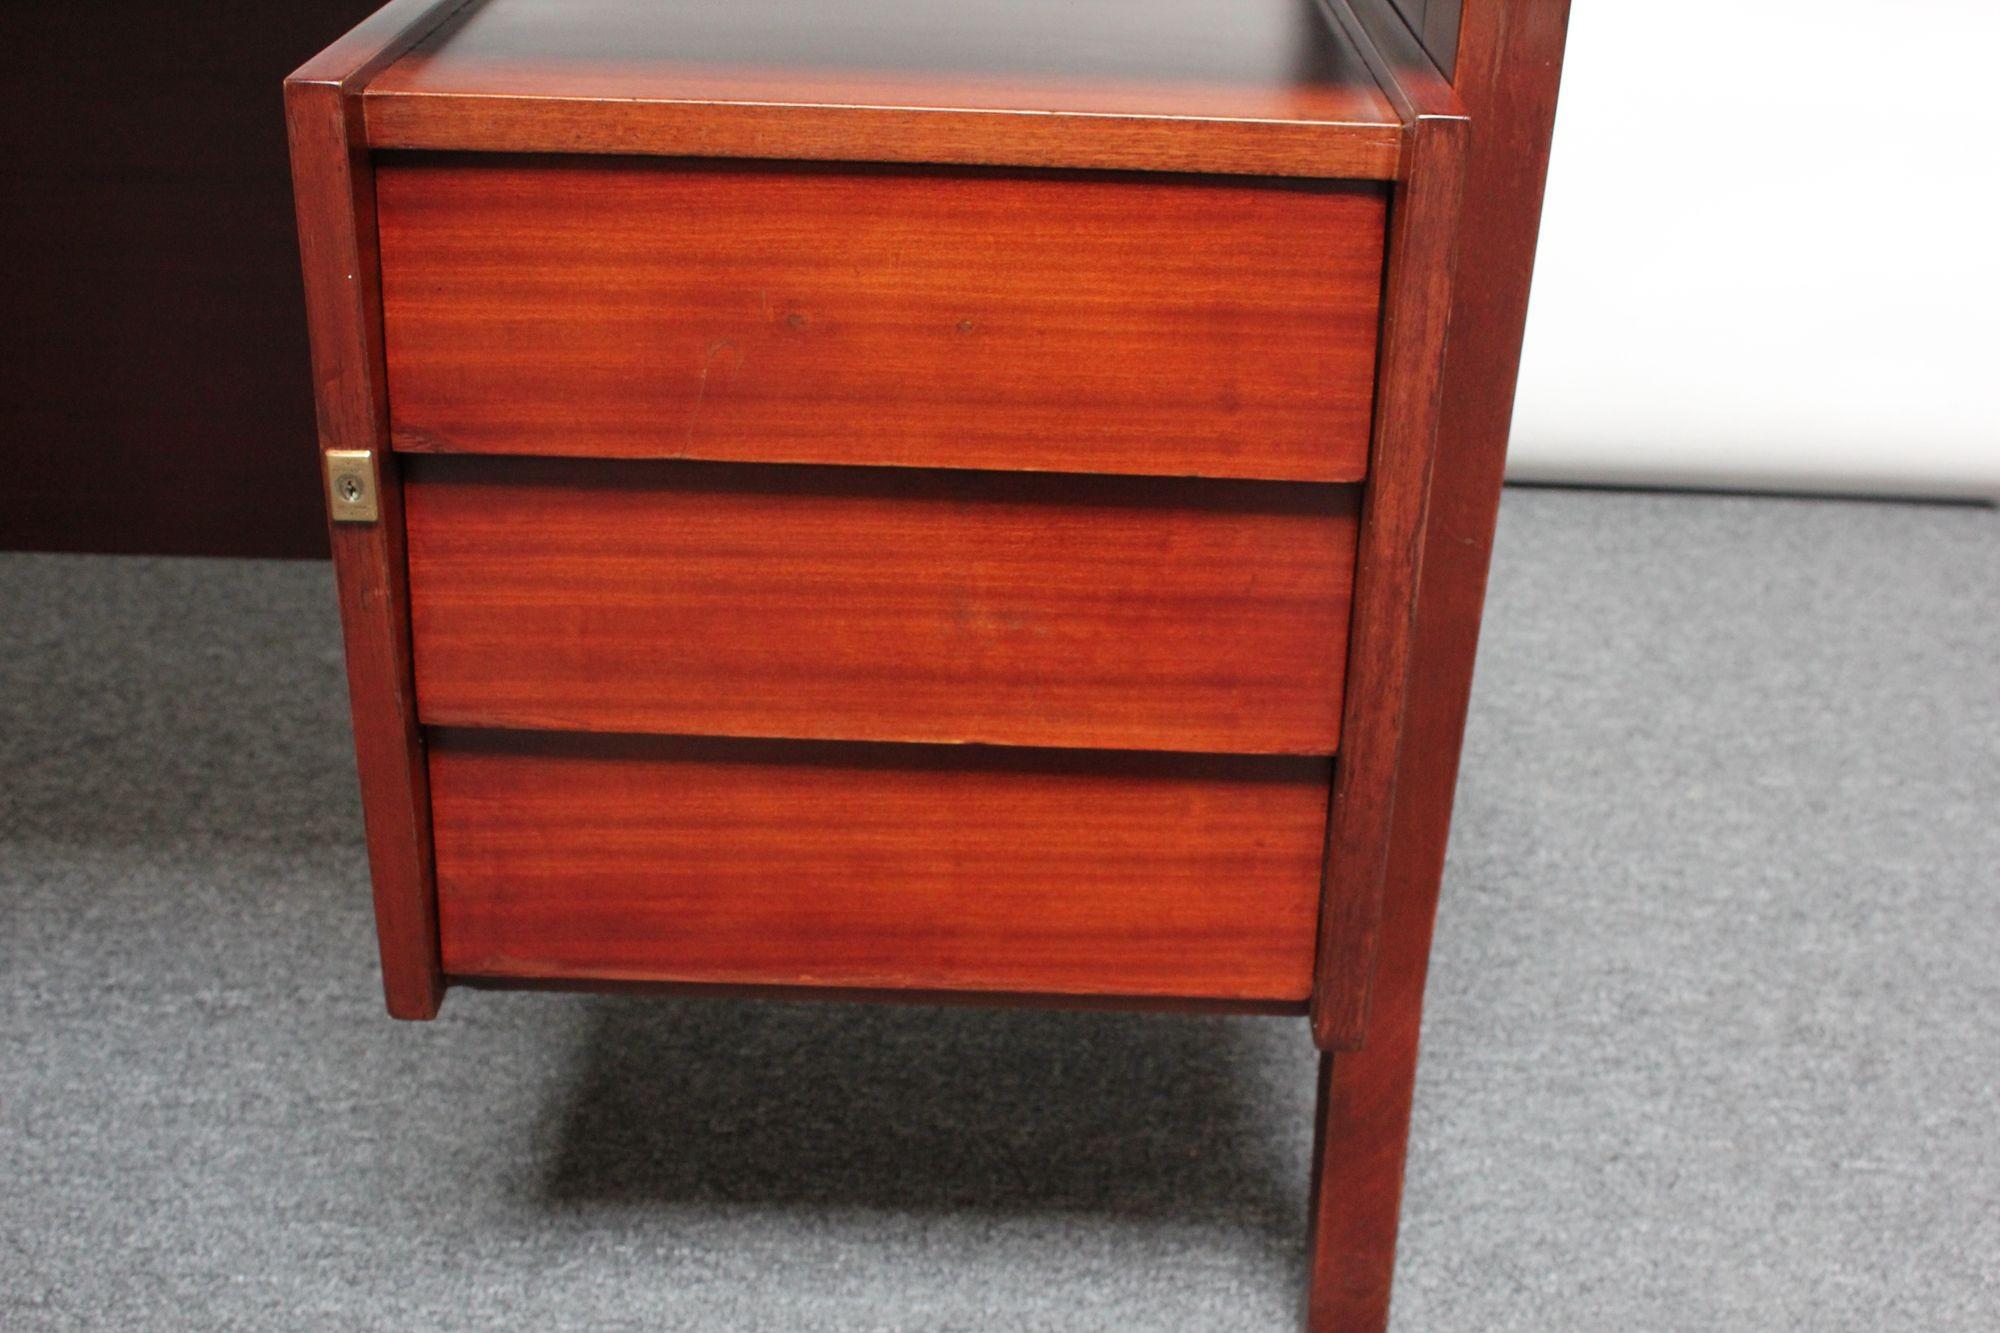 Petite Italian Modern Stained Mahogany Writing Desk by Gio Ponti for Schirolli For Sale 4